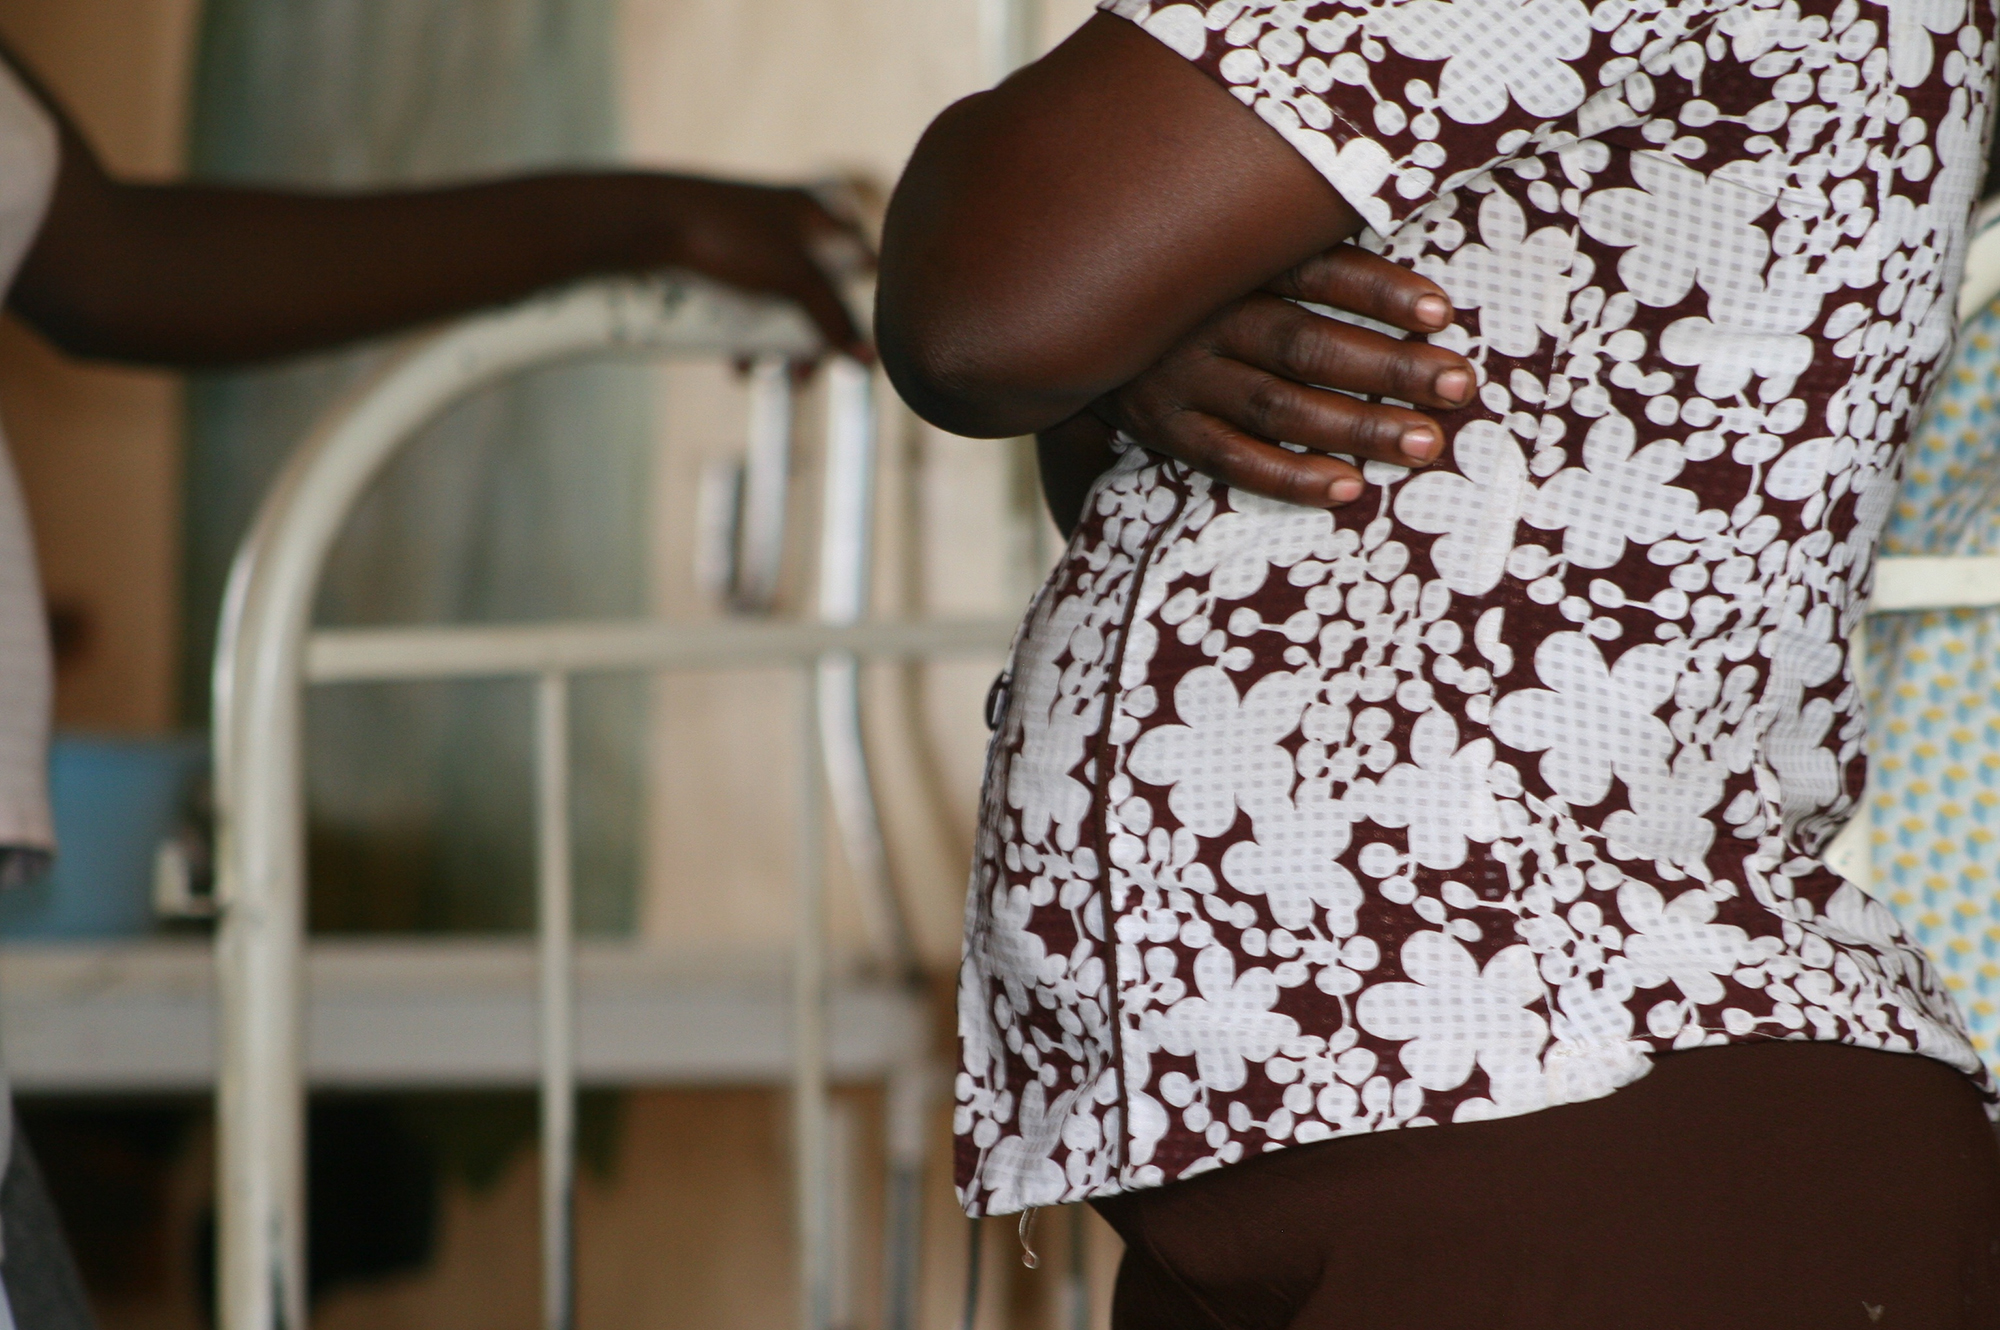 Torso of a pregnant person with arms crossed standing by a hospital bed in Botswana.